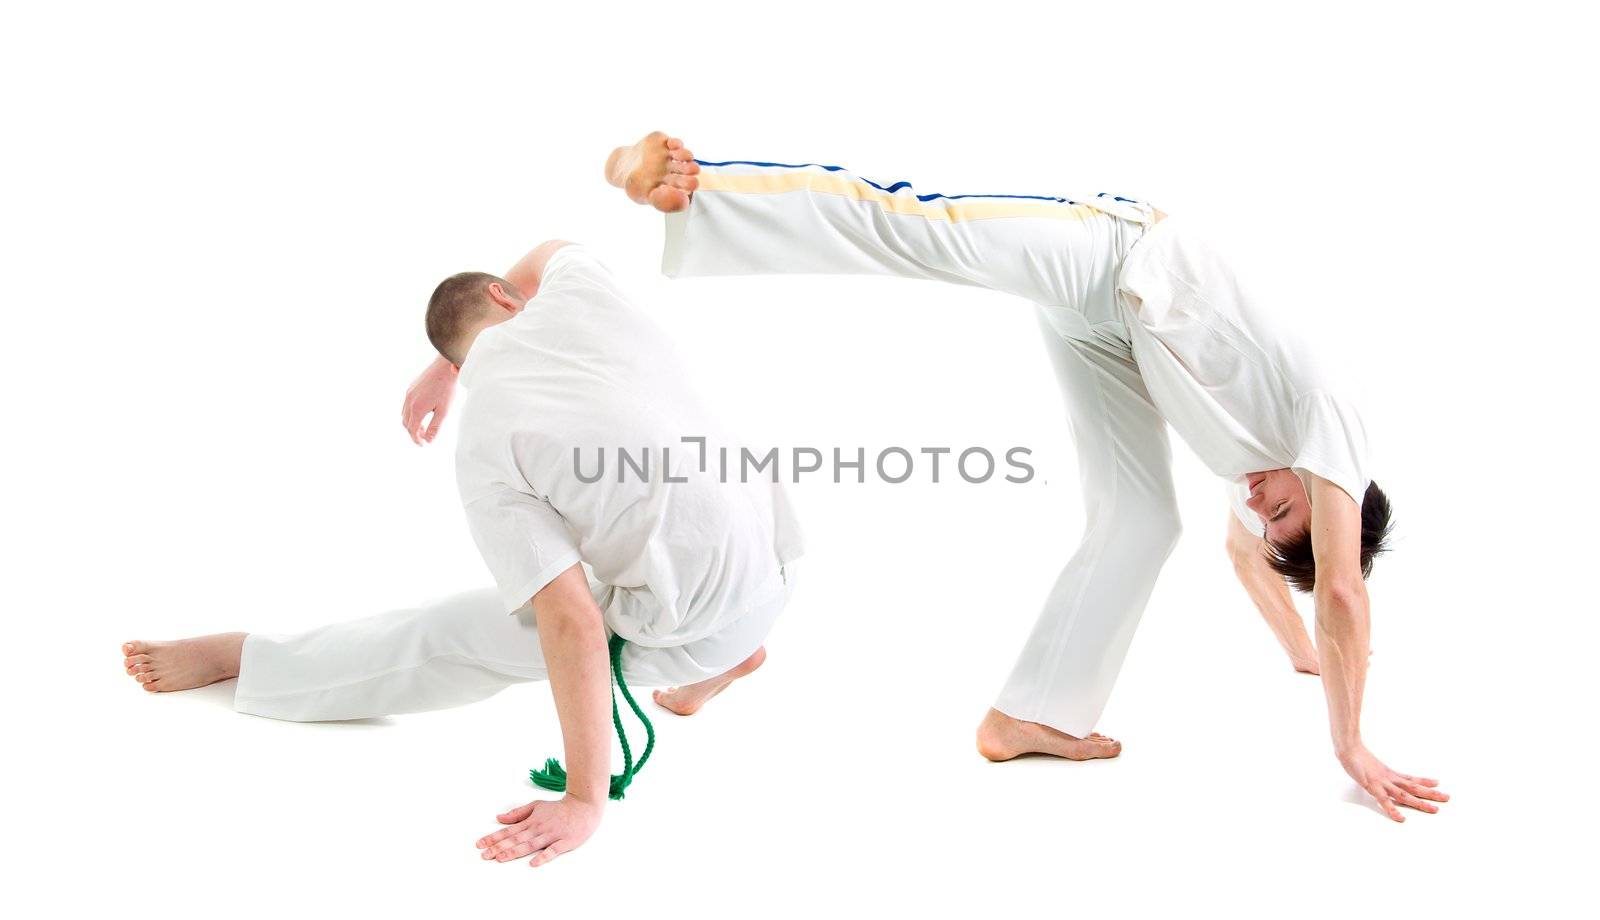 Contact Sport .Capoeira. by Fanfo